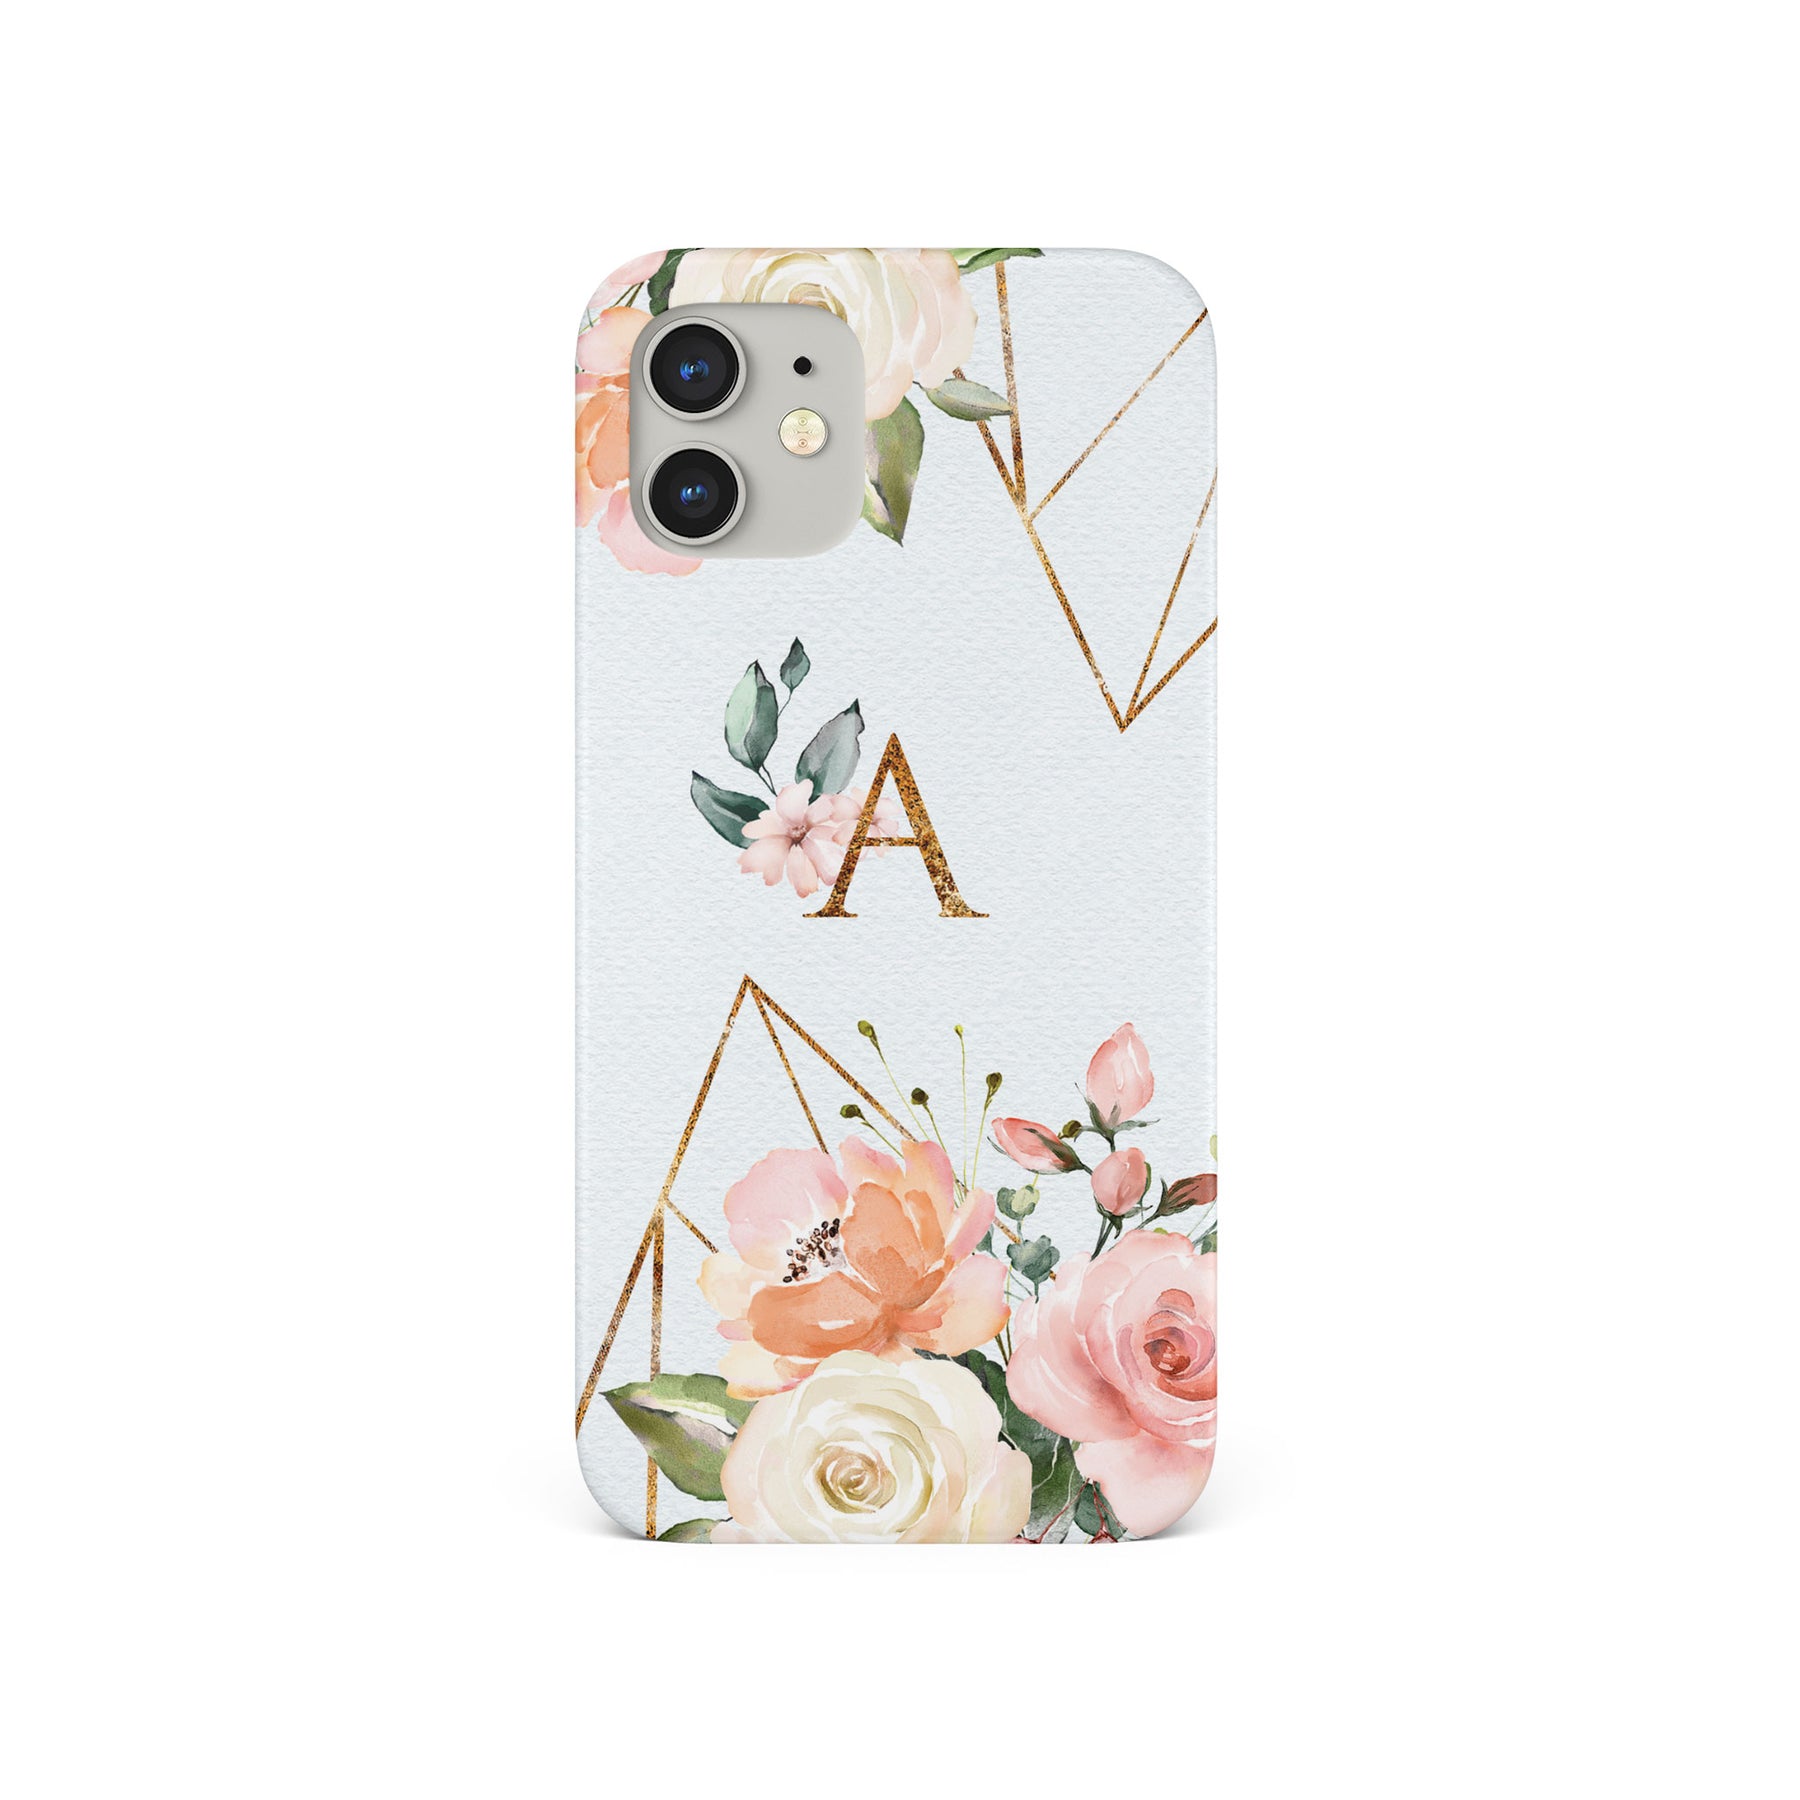 Personalised Hard Phone Case Floral Pink English Roses Bouquets